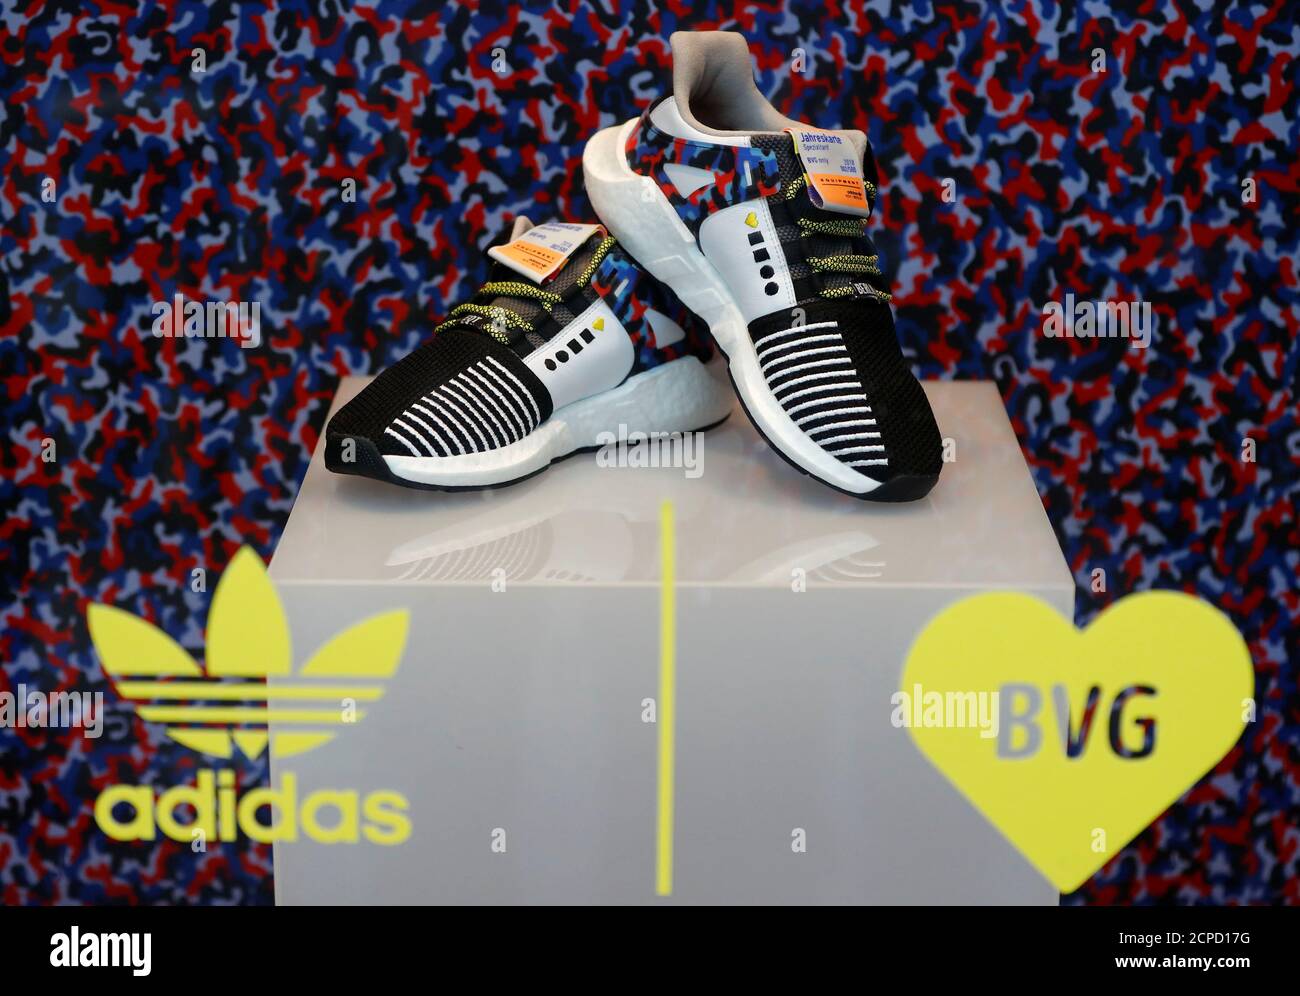 adidas special edition sneakers